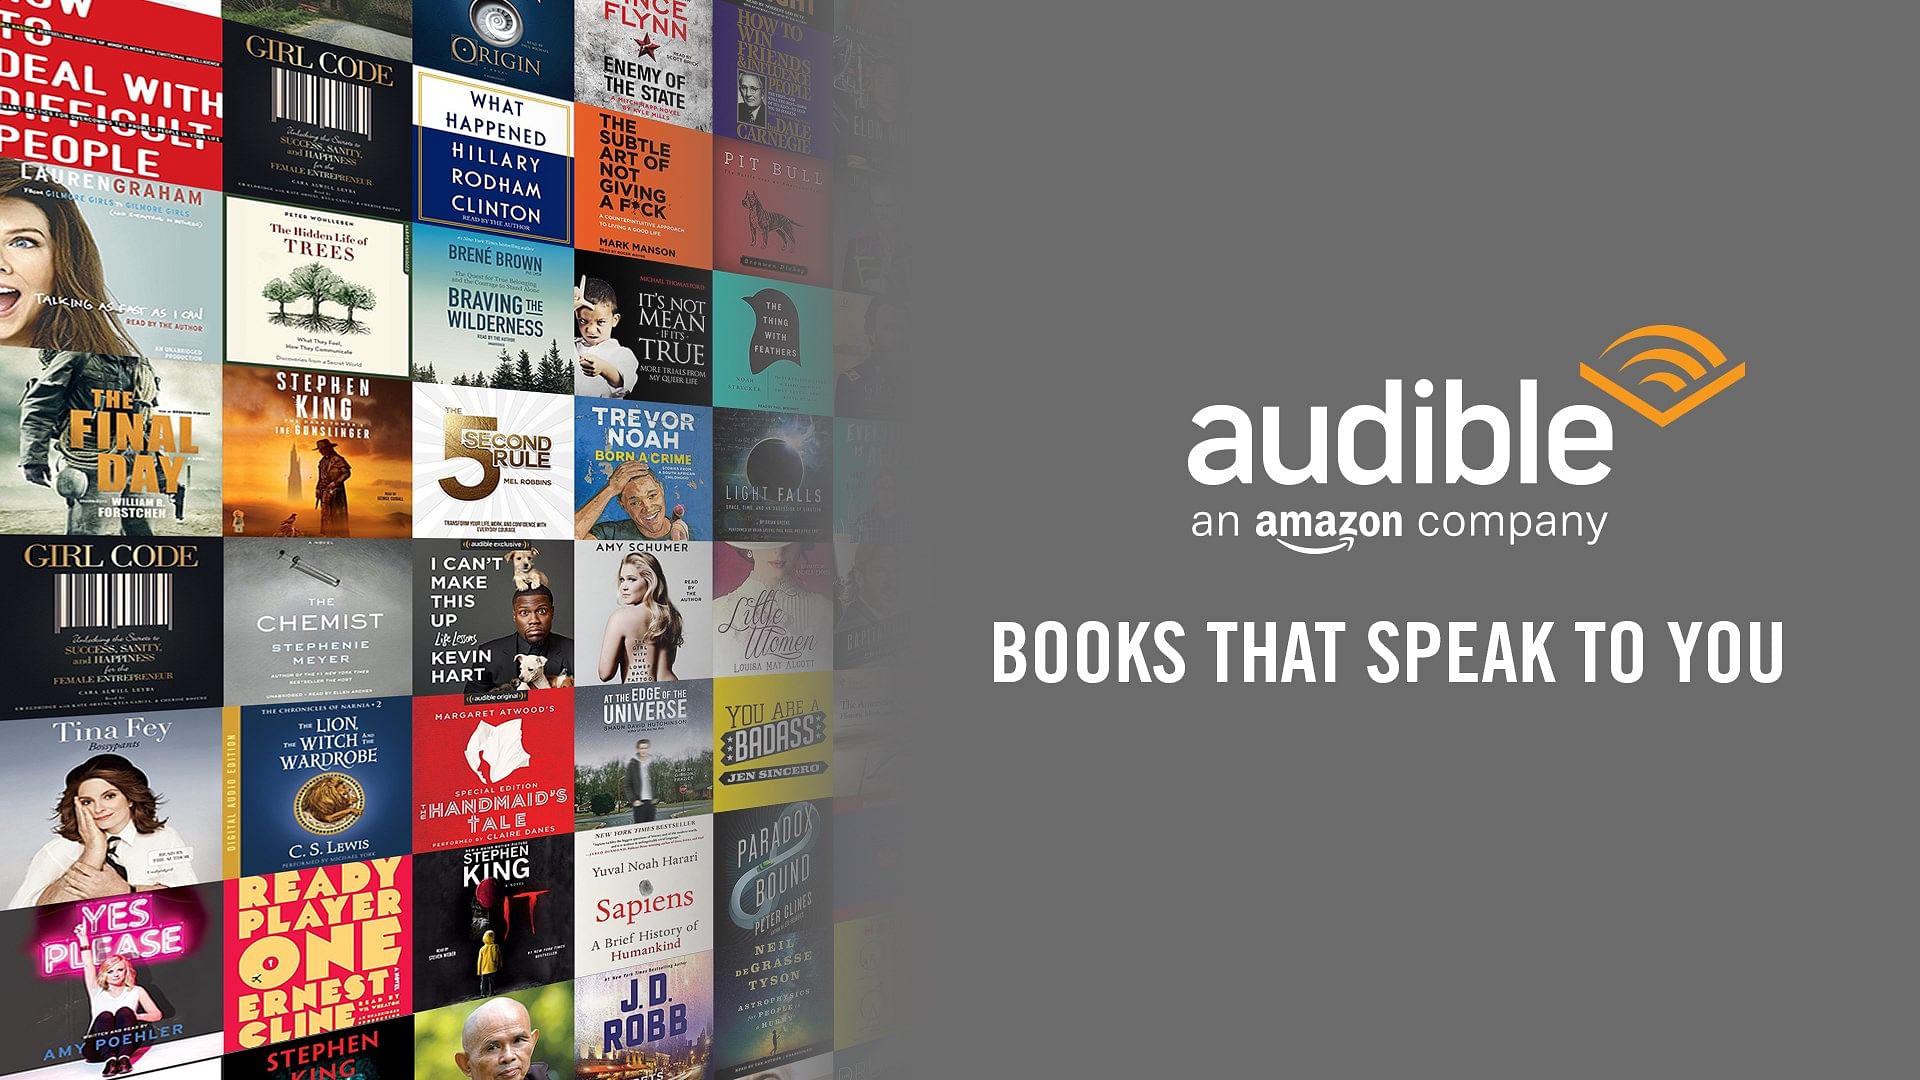 Amazon Audible has been launched in India.